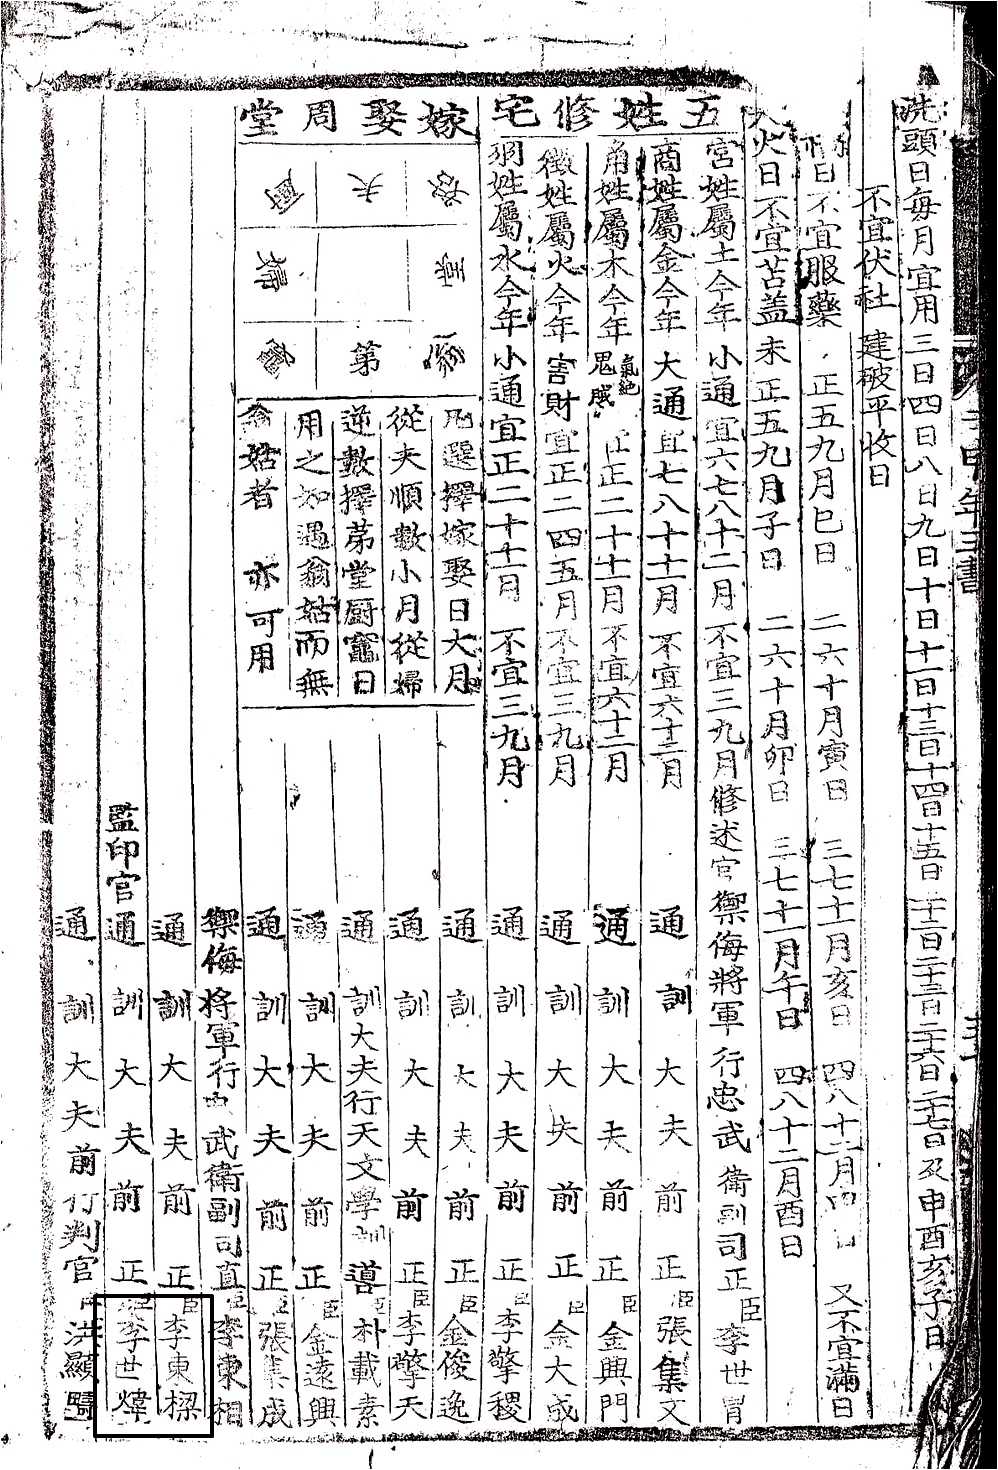 The last page of the Calender of the 28th reign year of King Yeongjo (1752) has two names of calender computer, Yi Se-ju (李世胄) and Yi Se-wui (李世？) (Adopted from Nha Il-Seong).